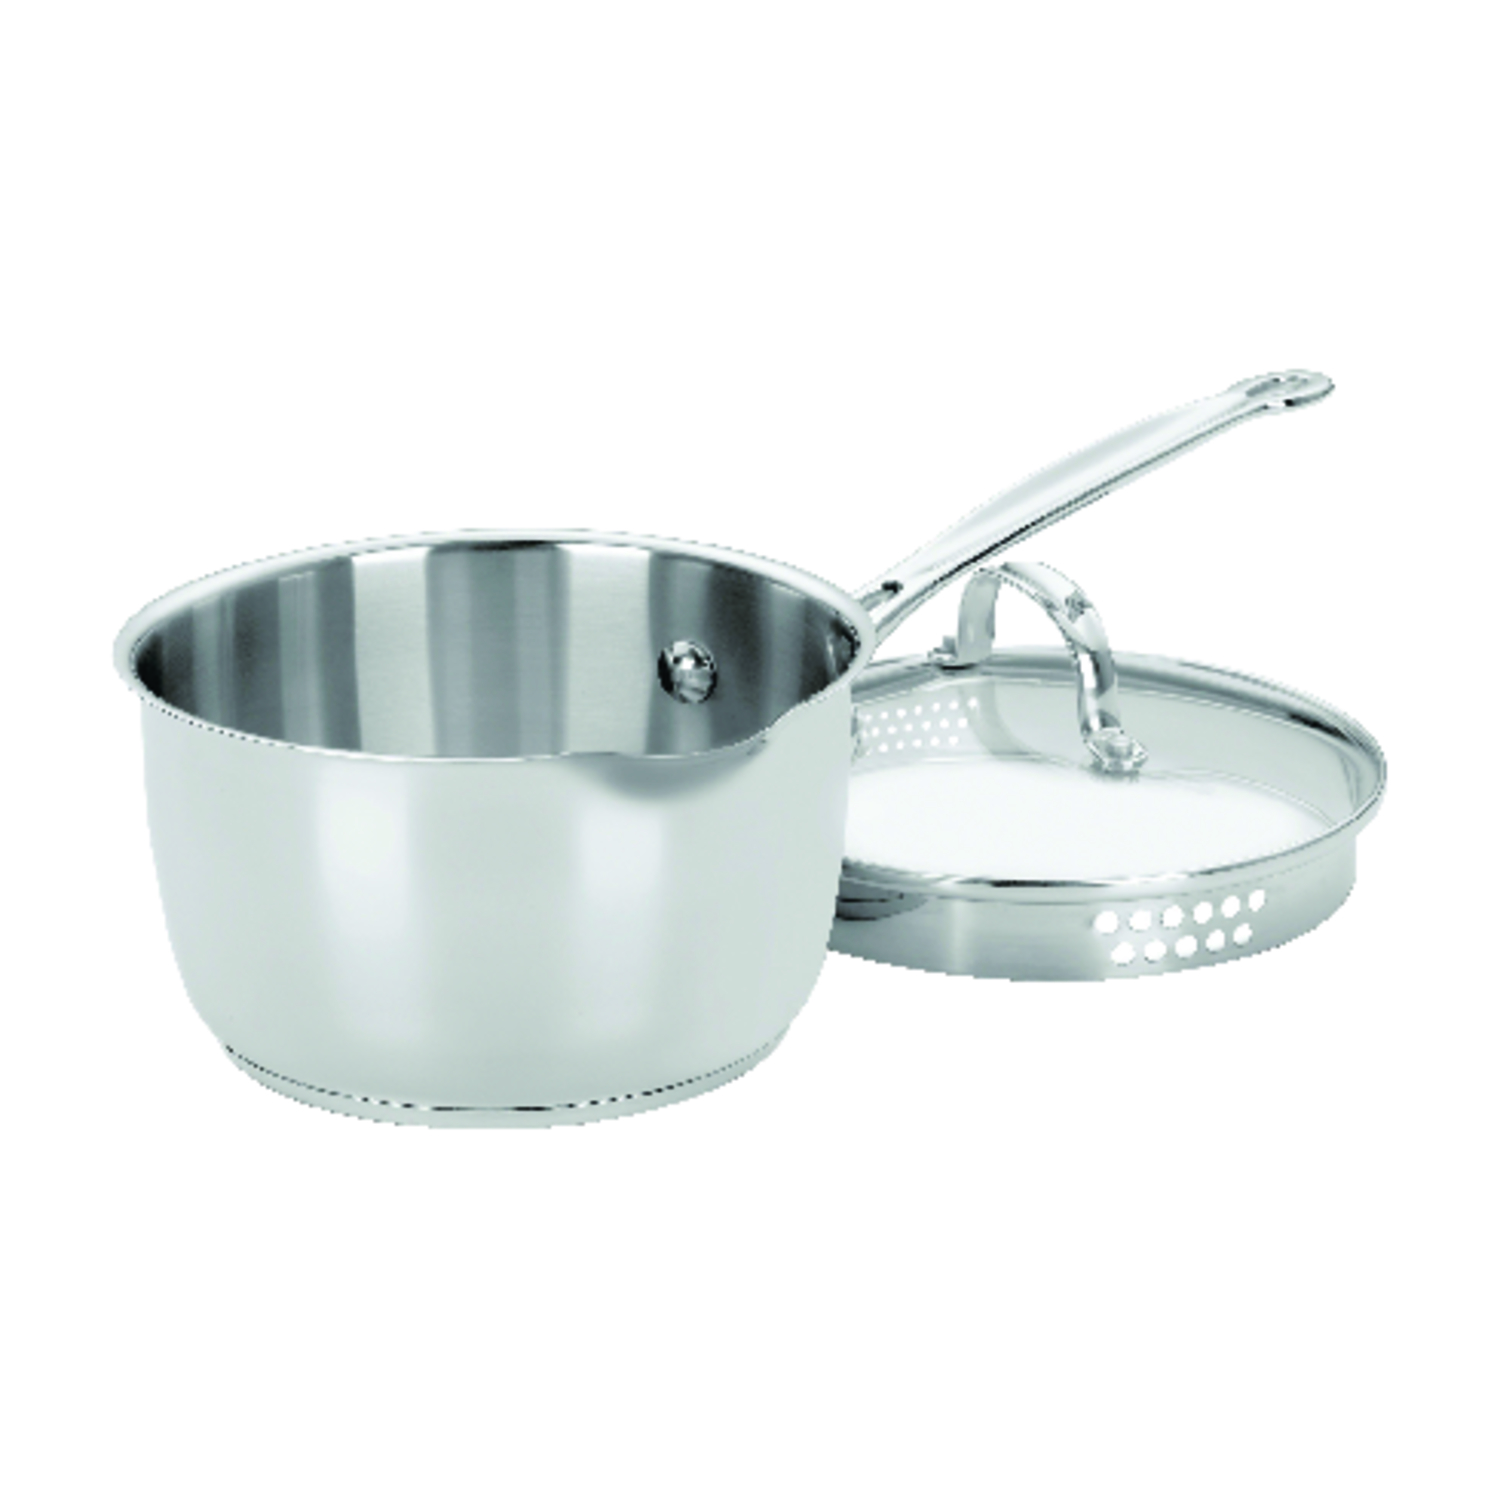 Photos - Other Accessories Cuisinart Chef's Classic Stainless Steel Saucepan 2 qt Silver 719-18P 